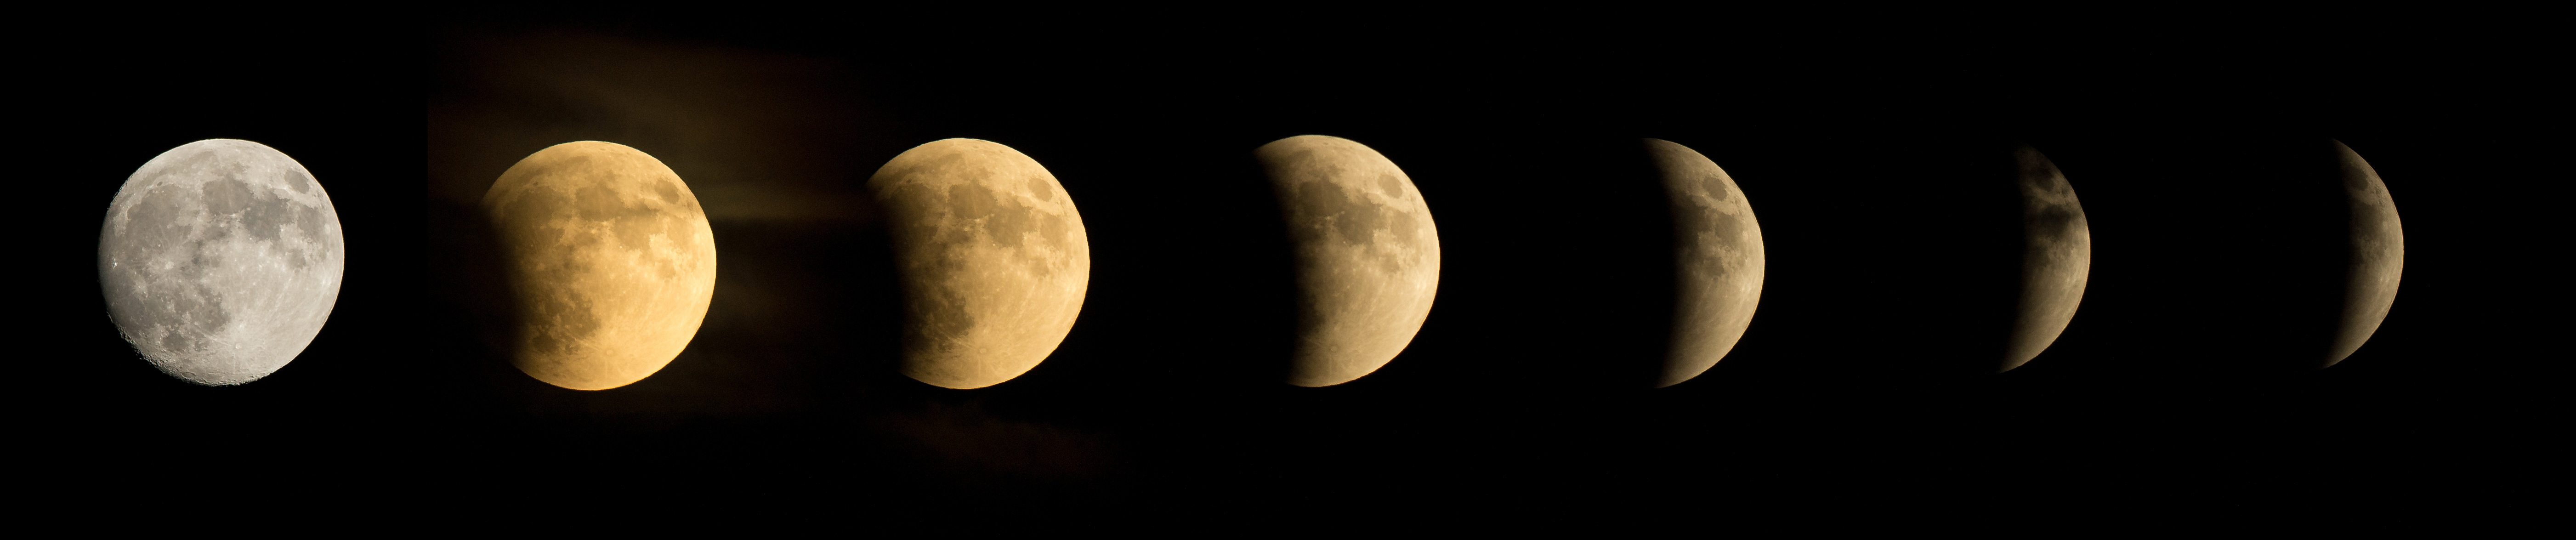 Series of images showing a lunar eclipse